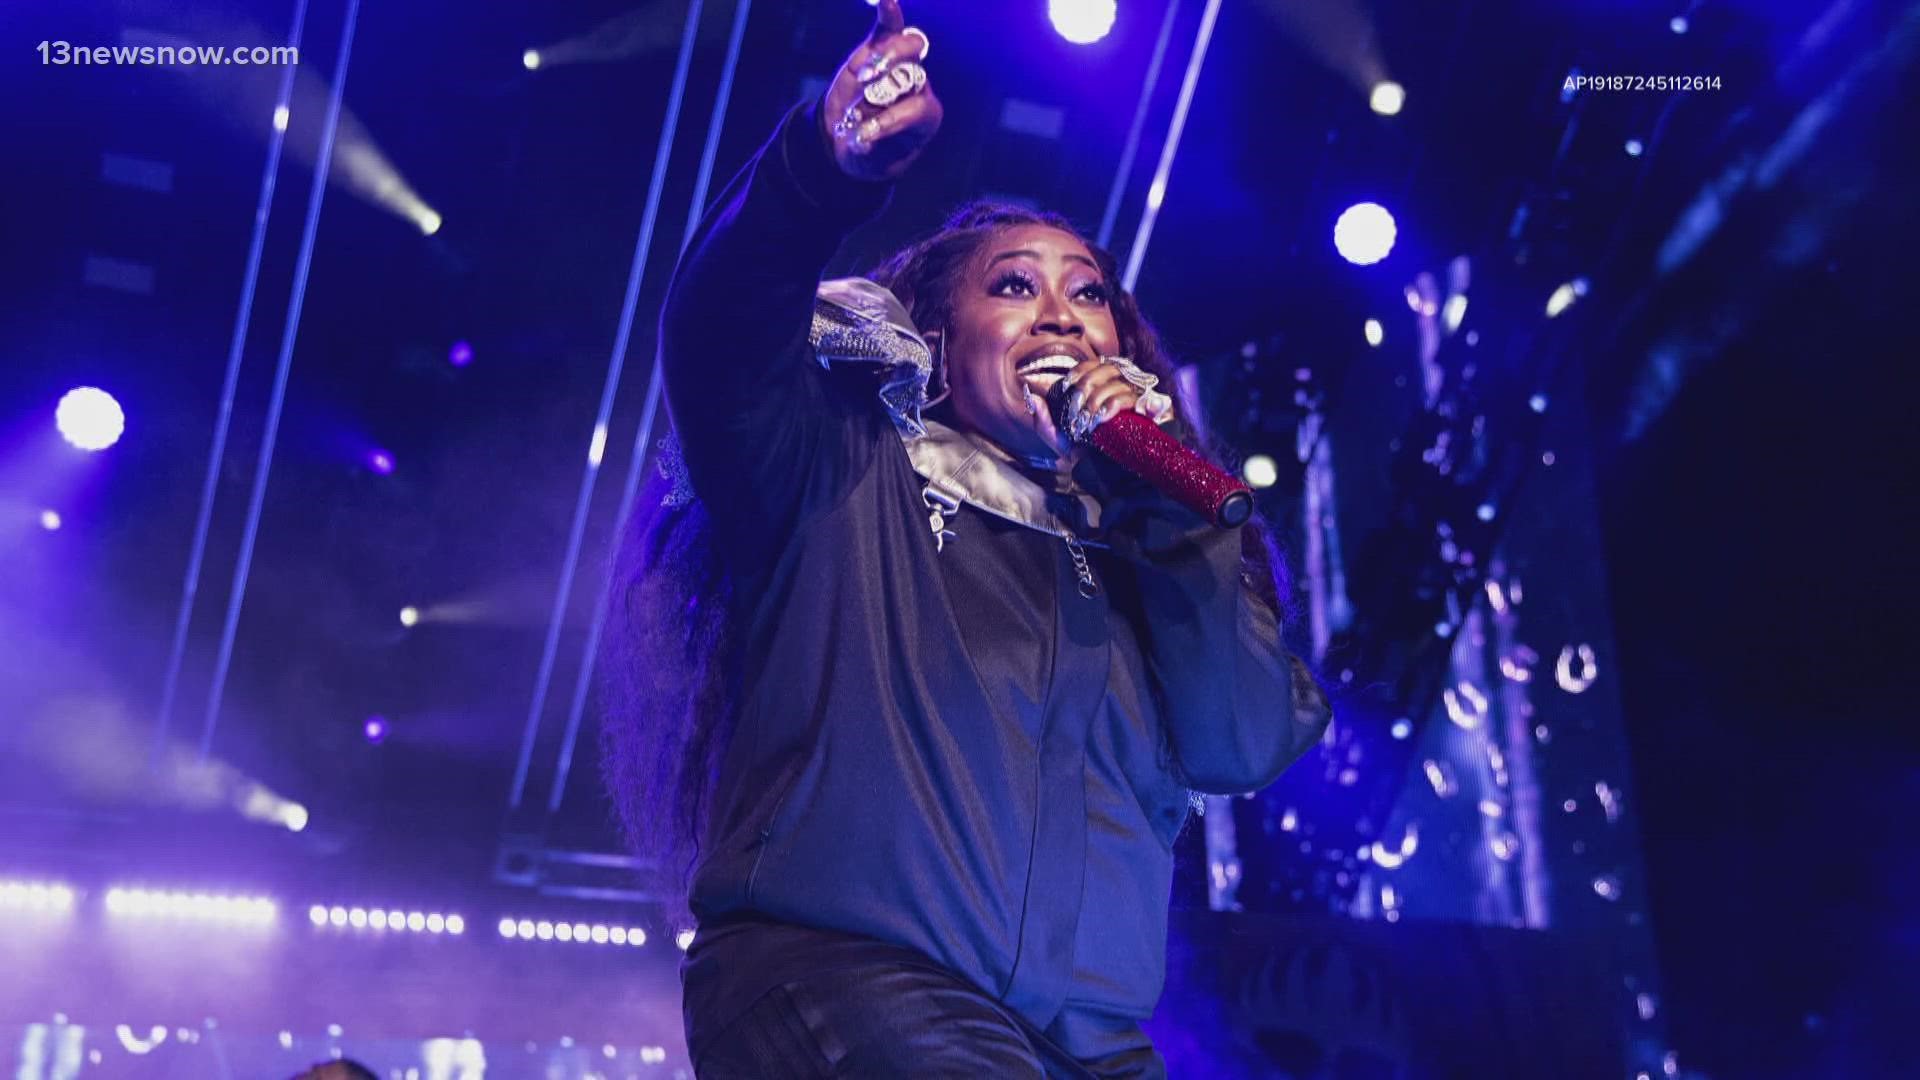 If it passes, part of McLean Street will become Missy Elliott Boulevard.